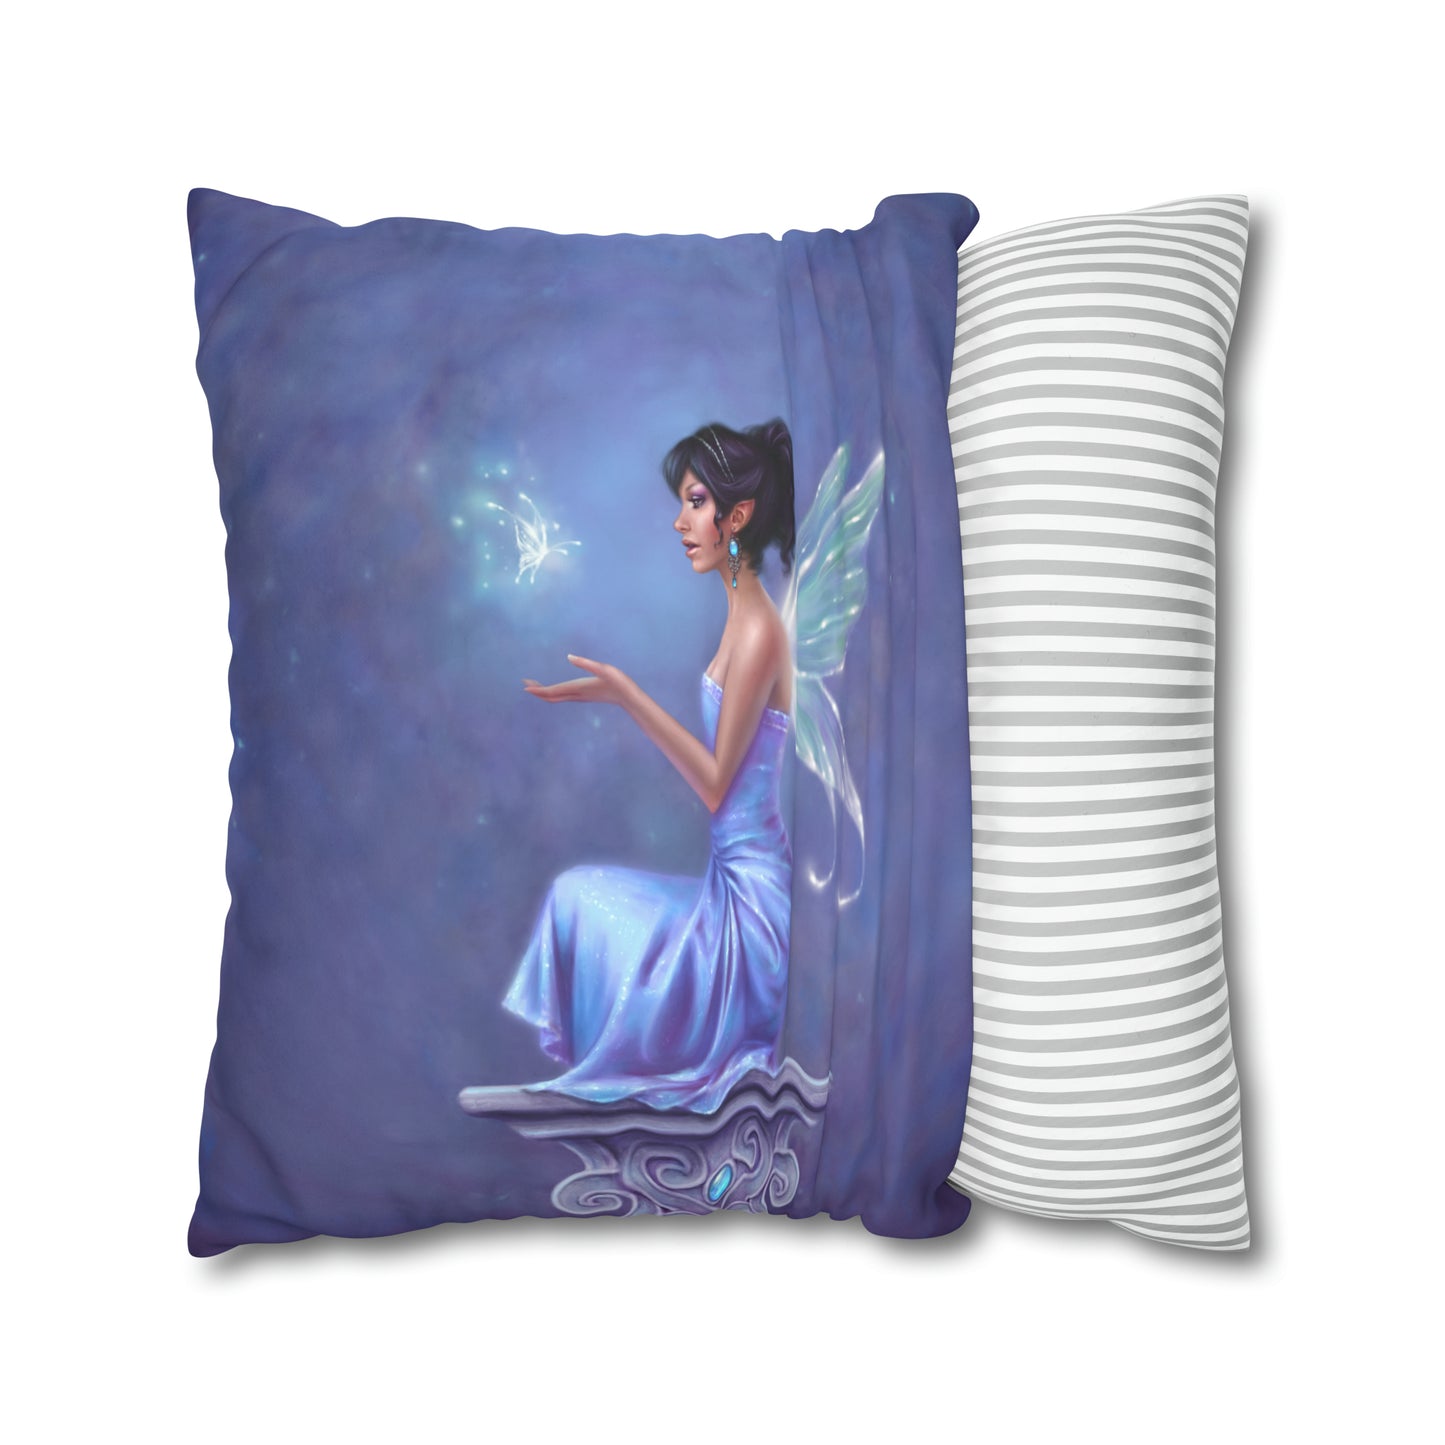 Throw Pillow Cover - Opalite